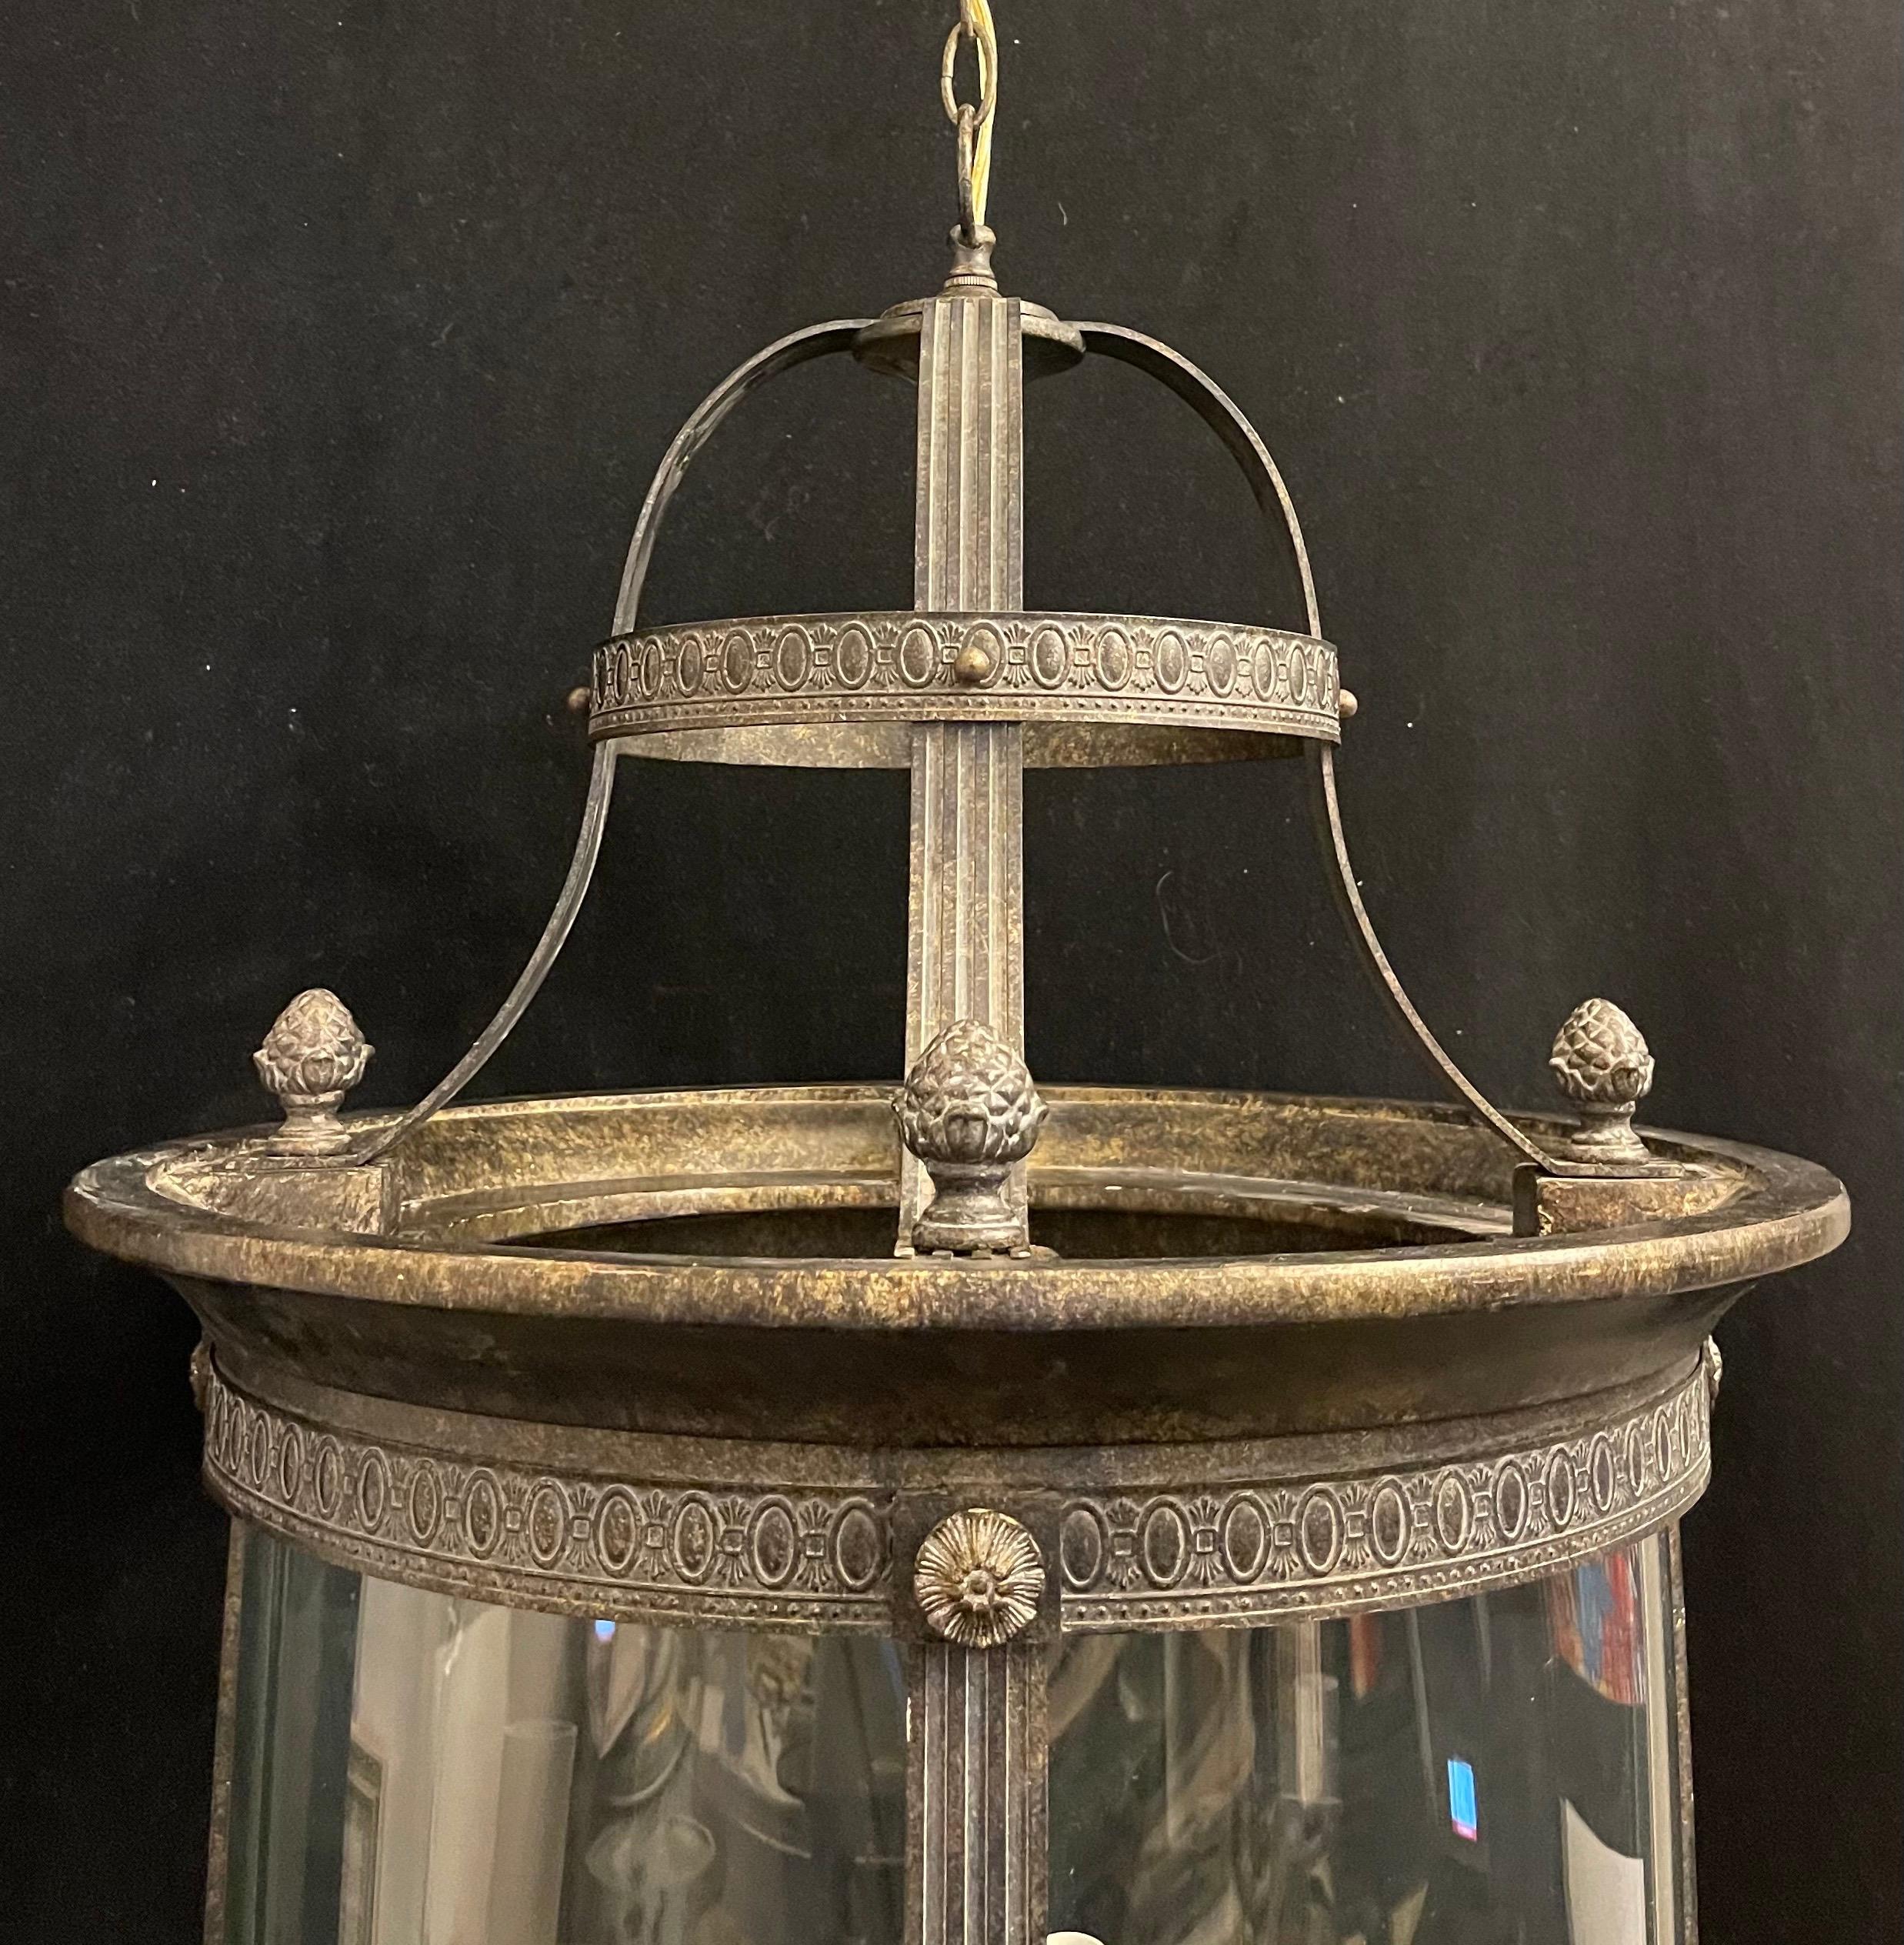 An elegant pair of large bronze gilt Louis XVI / neoclassical style 6 candelabra light fixtures each with 4 curved glass panels, both lanterns have been rewired and come with chain canopy and mounting hardware for installation.